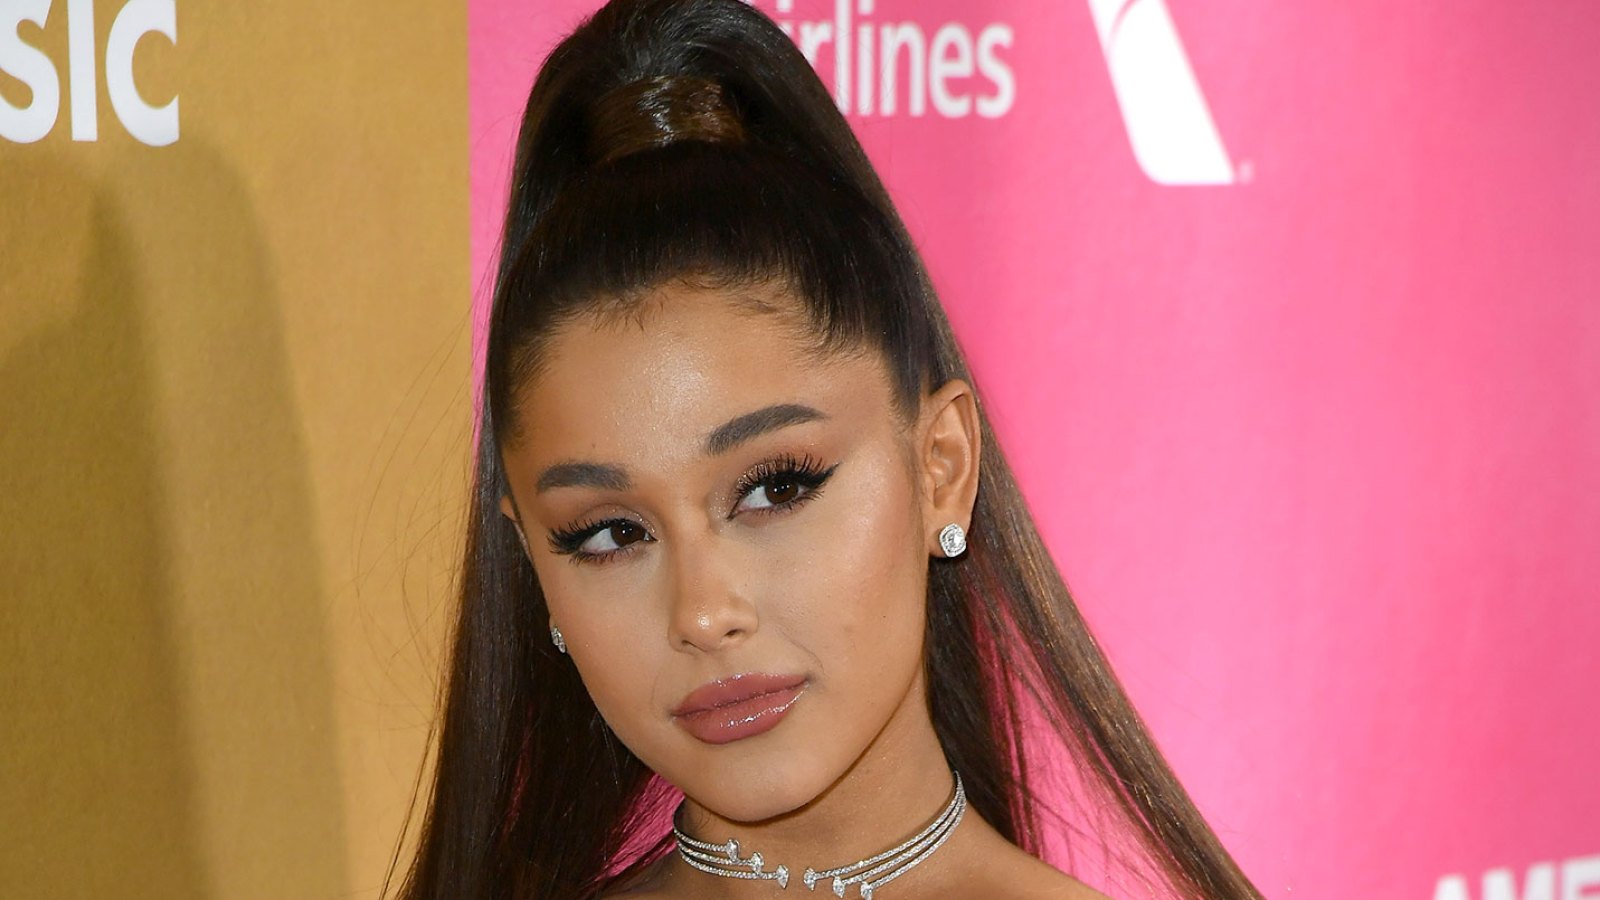 Ariana Grande Attempts to Fix Tattoo, Gets It Wrong Again